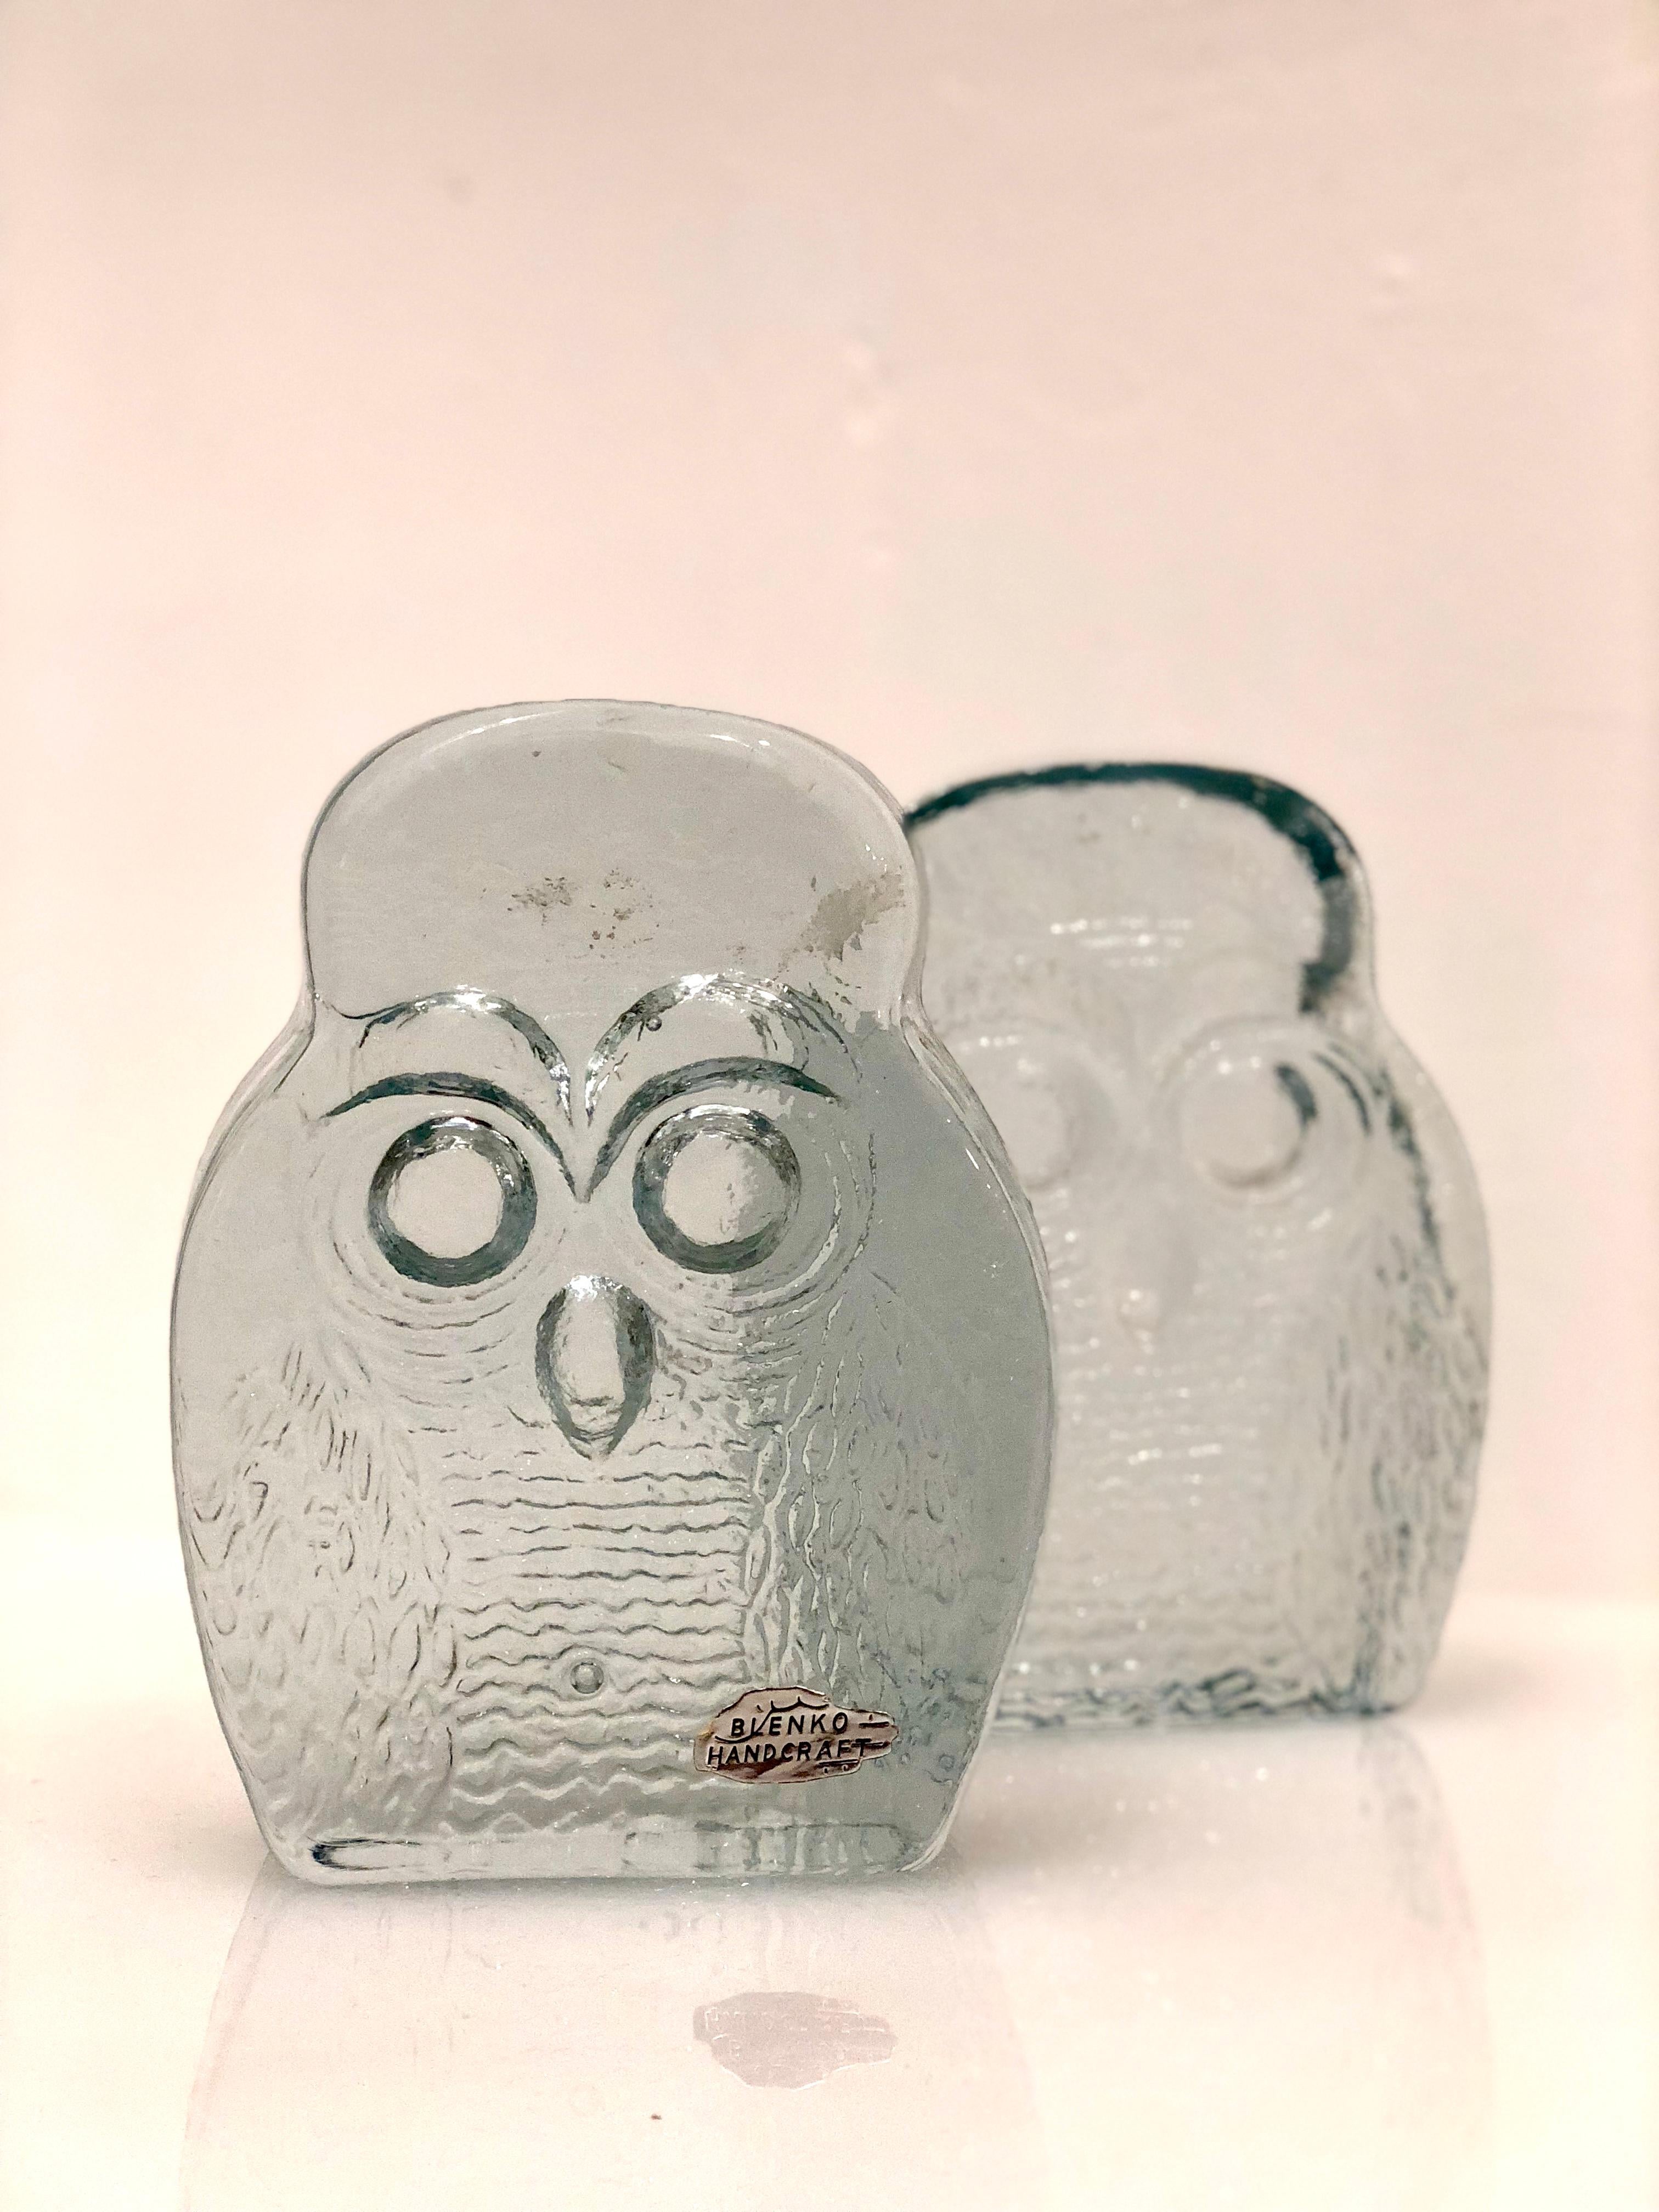 Nice pair of Blenko handcrafted owl bookends, clear glass a small fleabite on the bottom of one and the other has small chip as shown, the pair is sold in AS/IS condition.